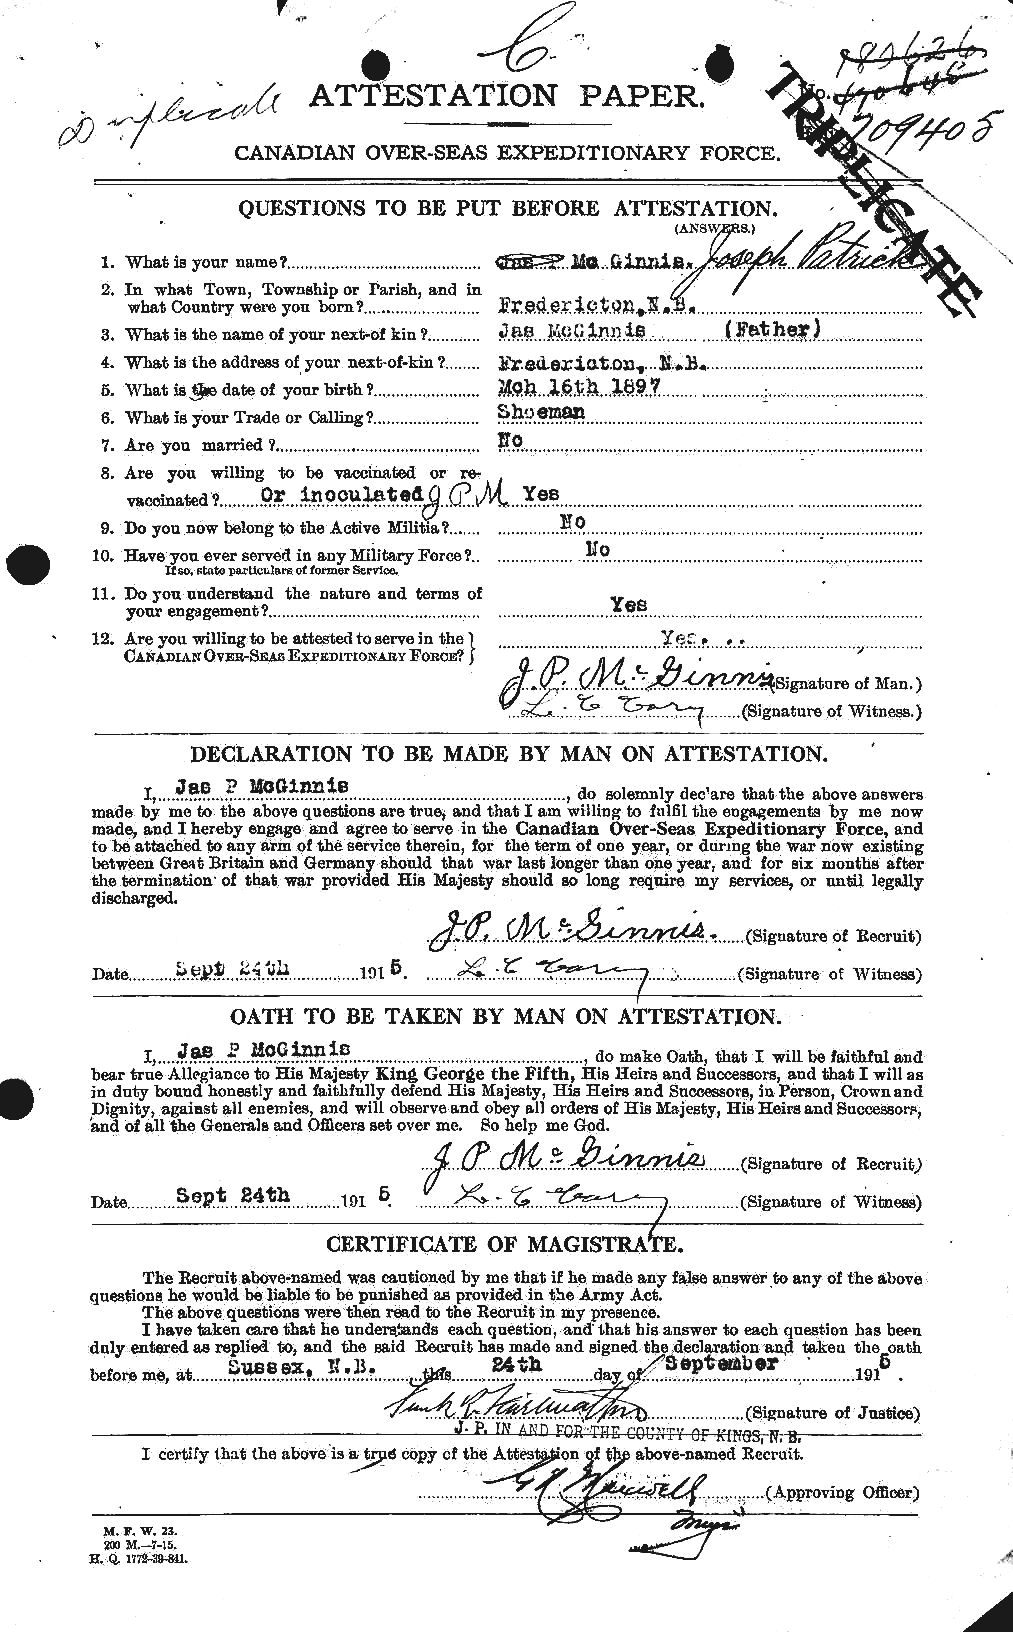 Personnel Records of the First World War - CEF 526411a